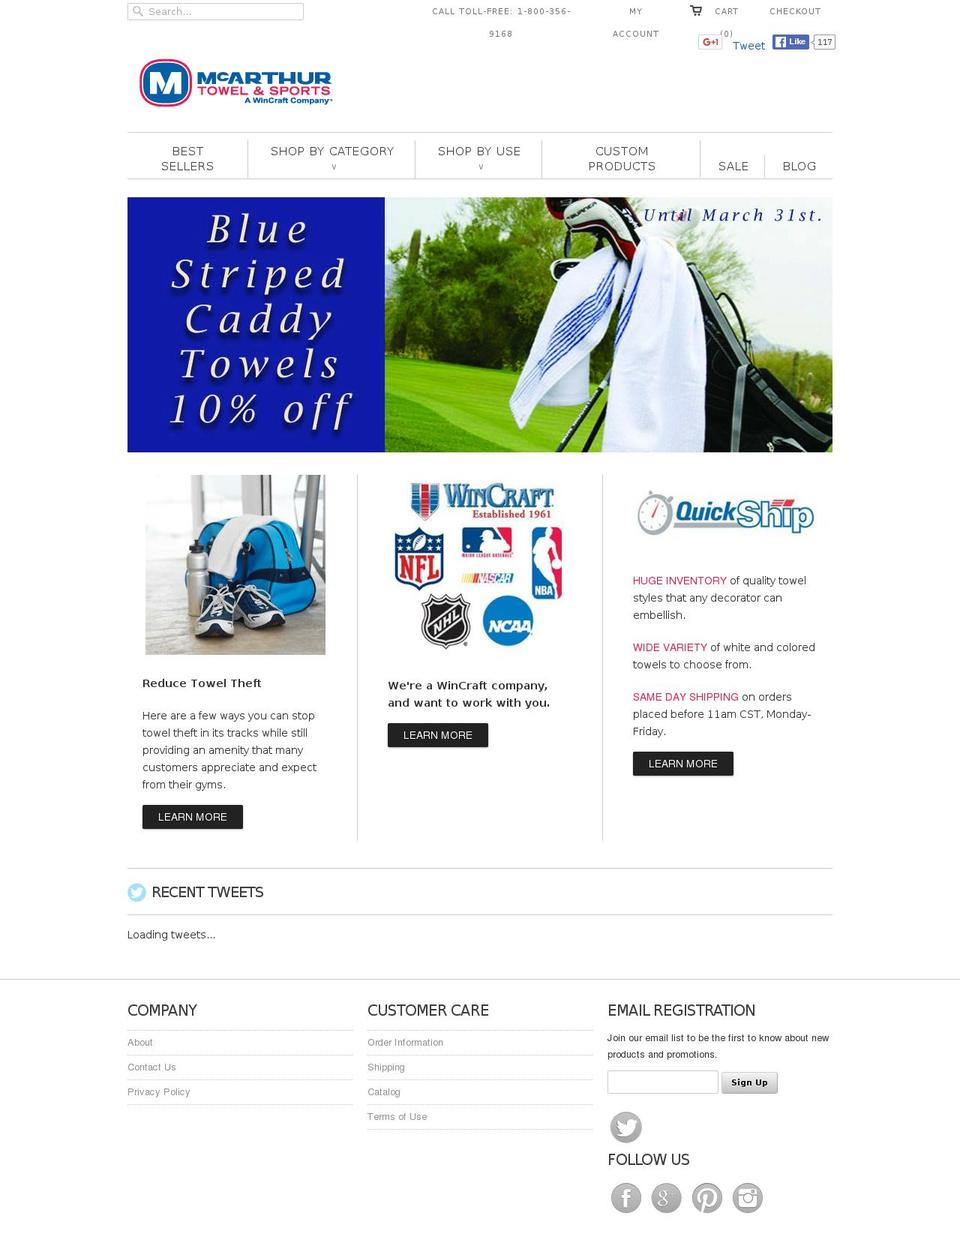 Responsive Shopify theme site example mcarthurtowels.com